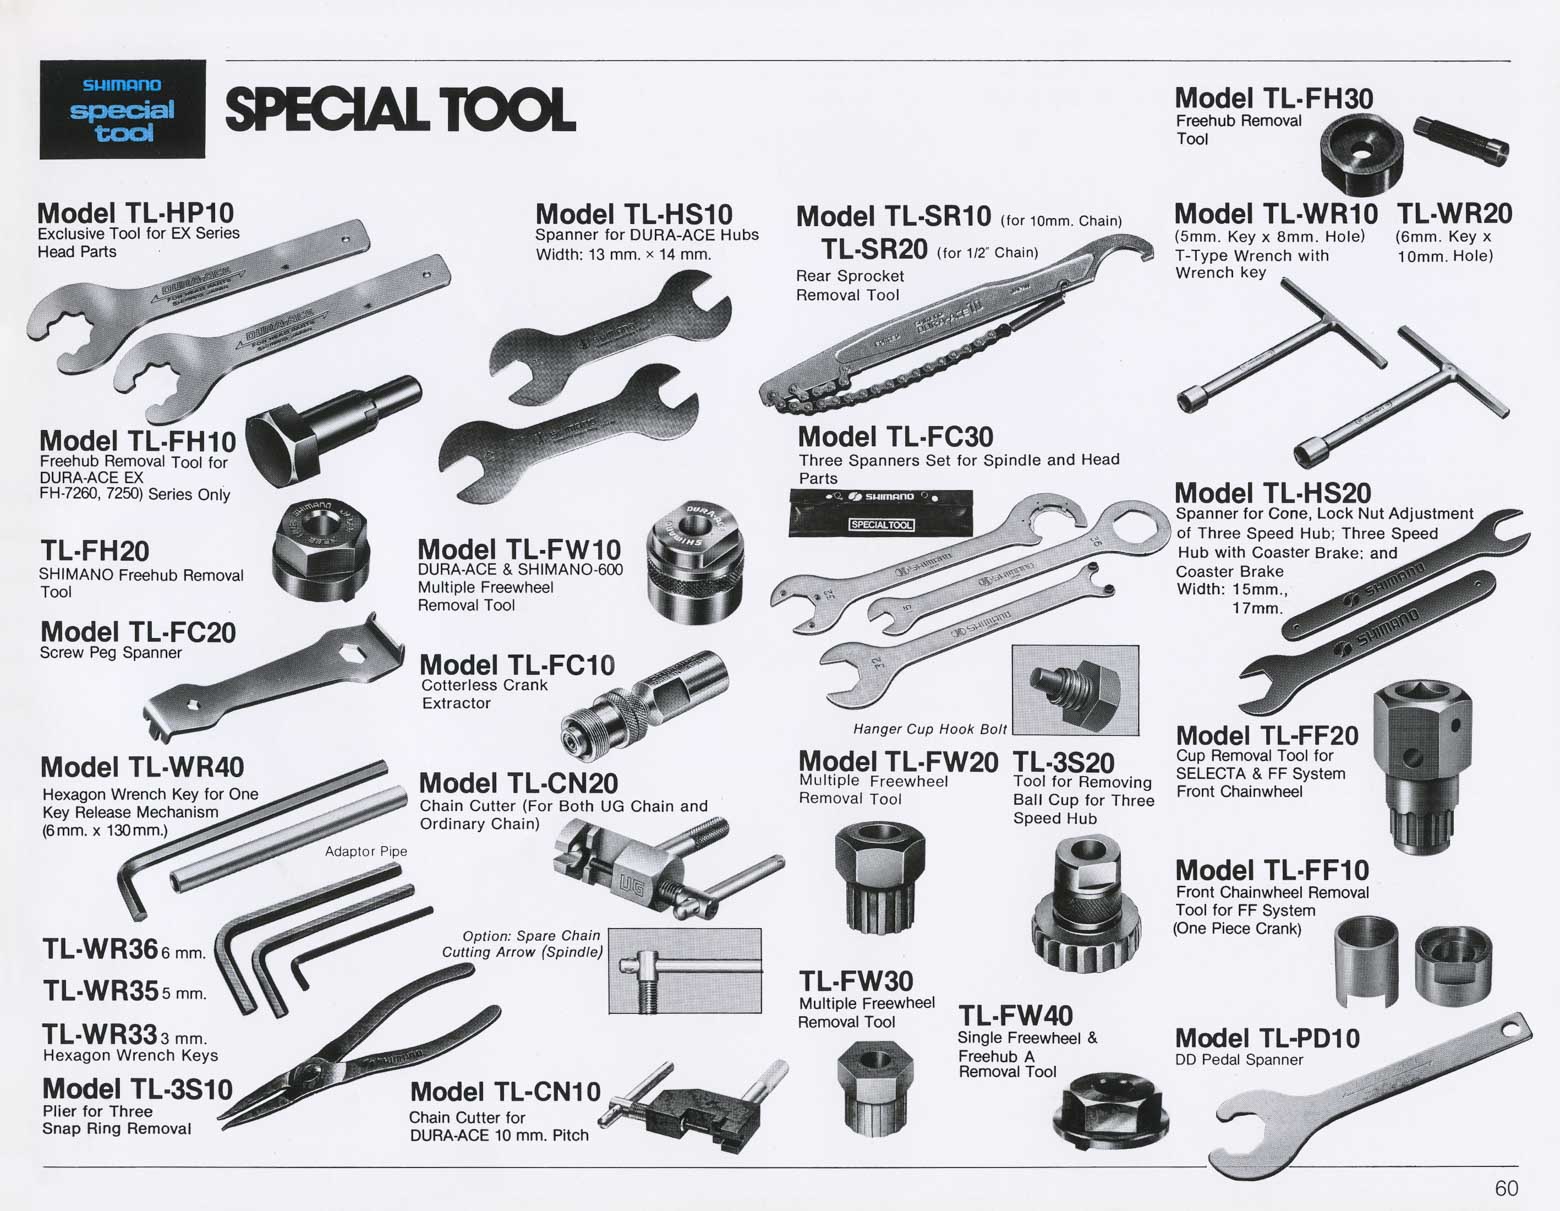 Shimano Bicycle System Components 1981 page 60 main image